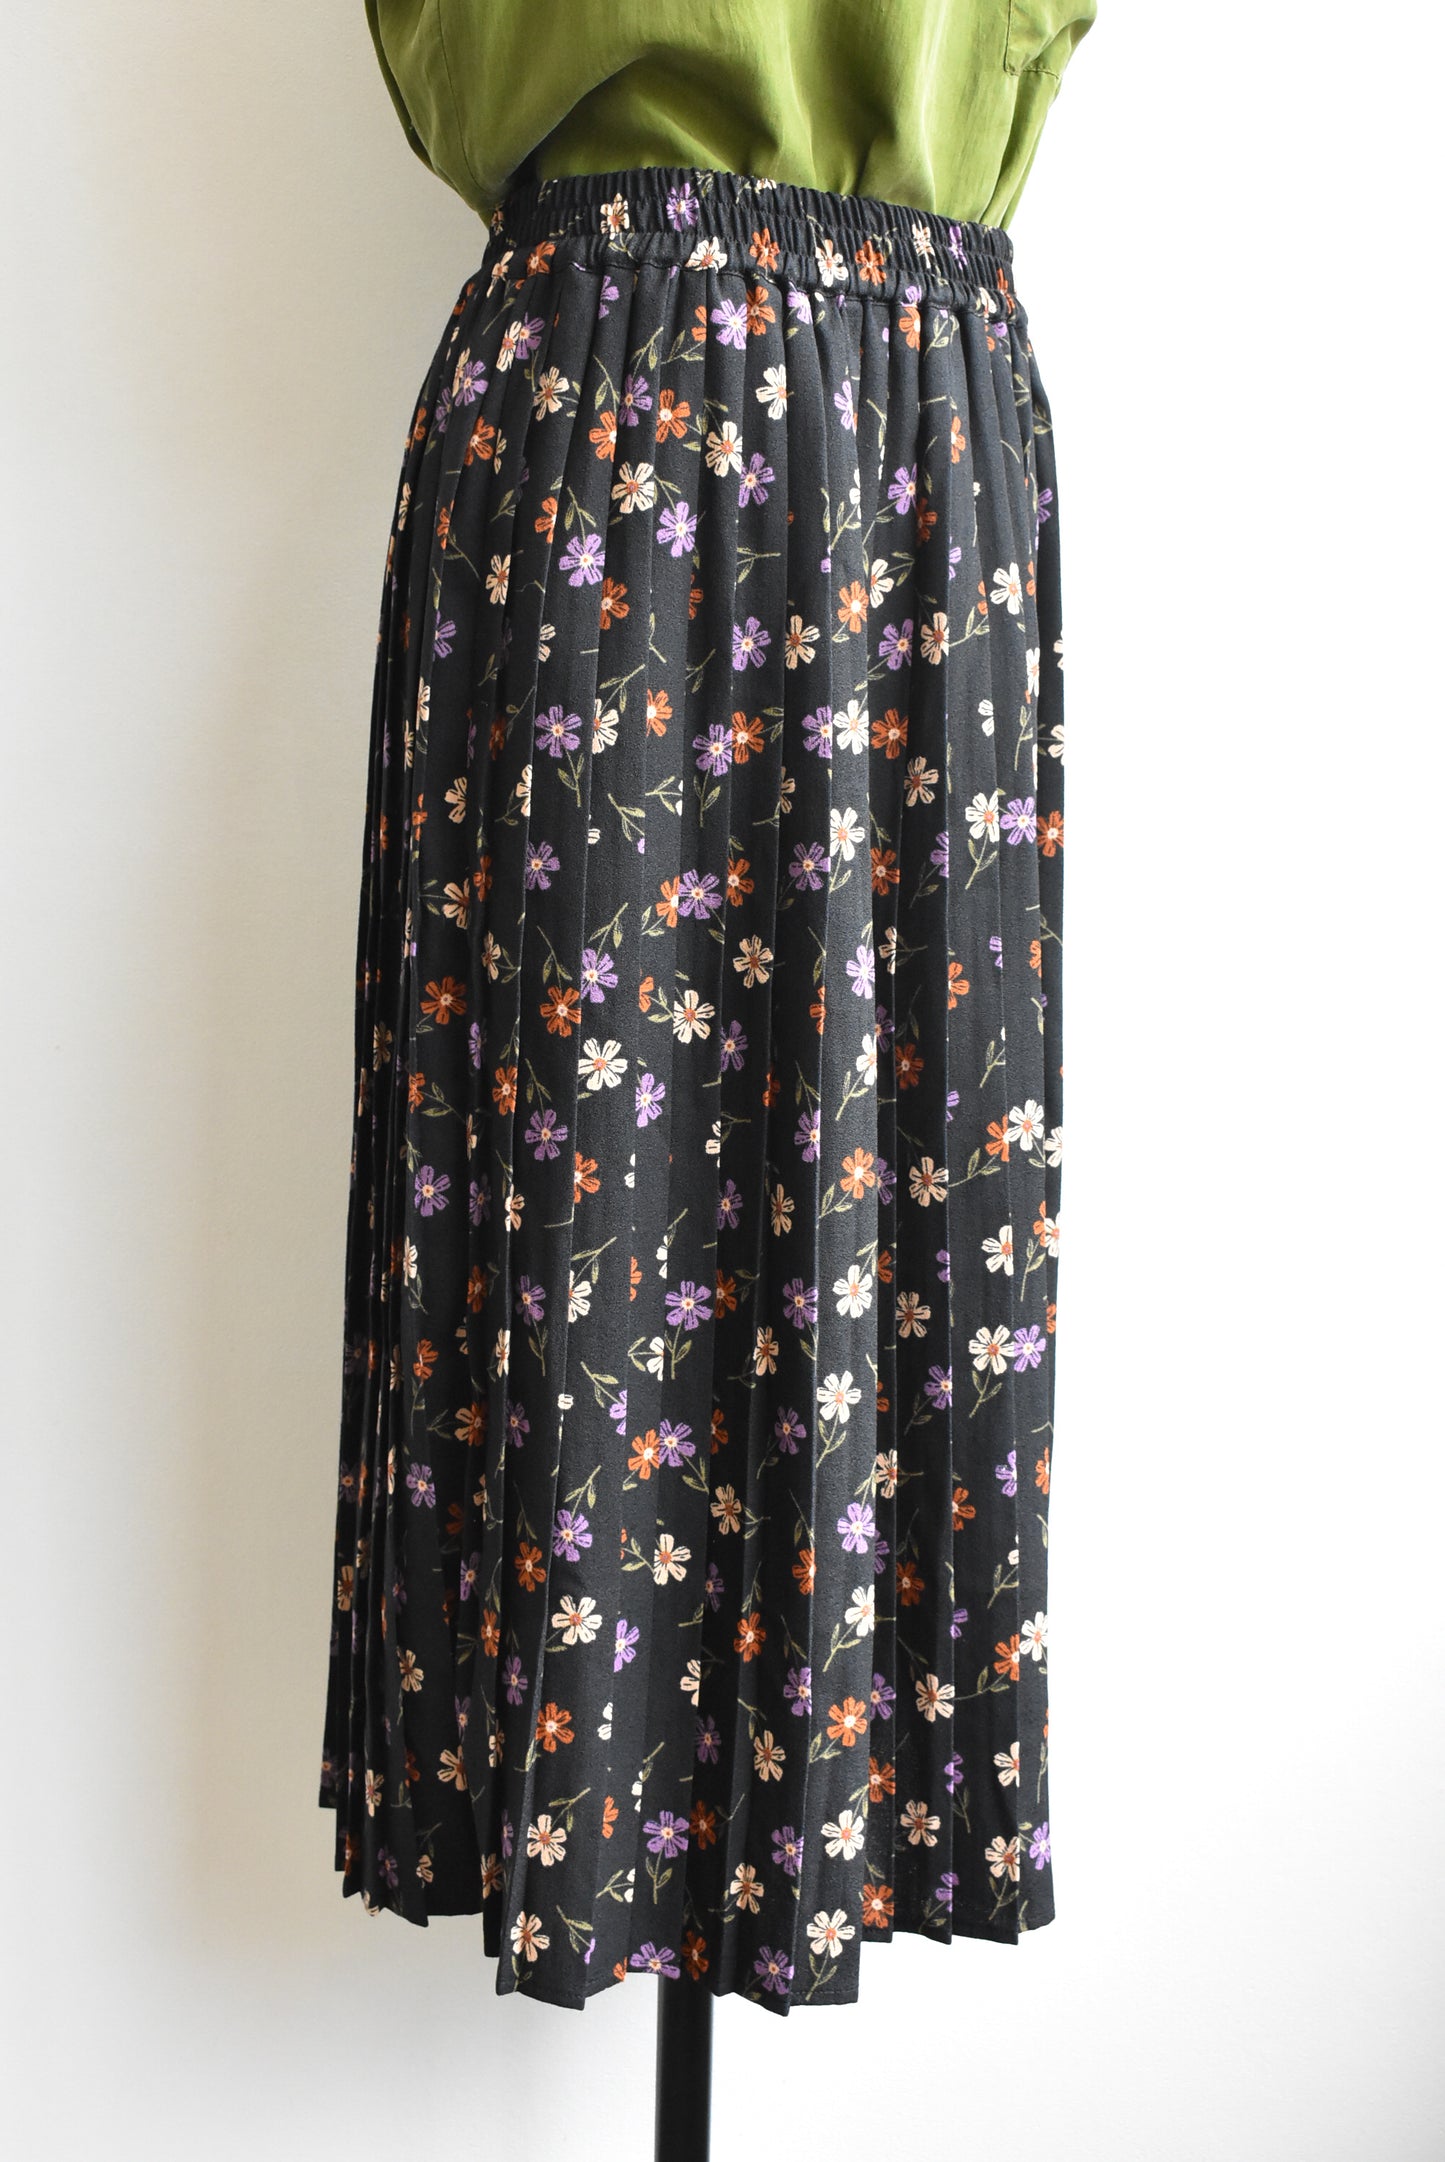 Princess Highway floral pleated skirt, size S